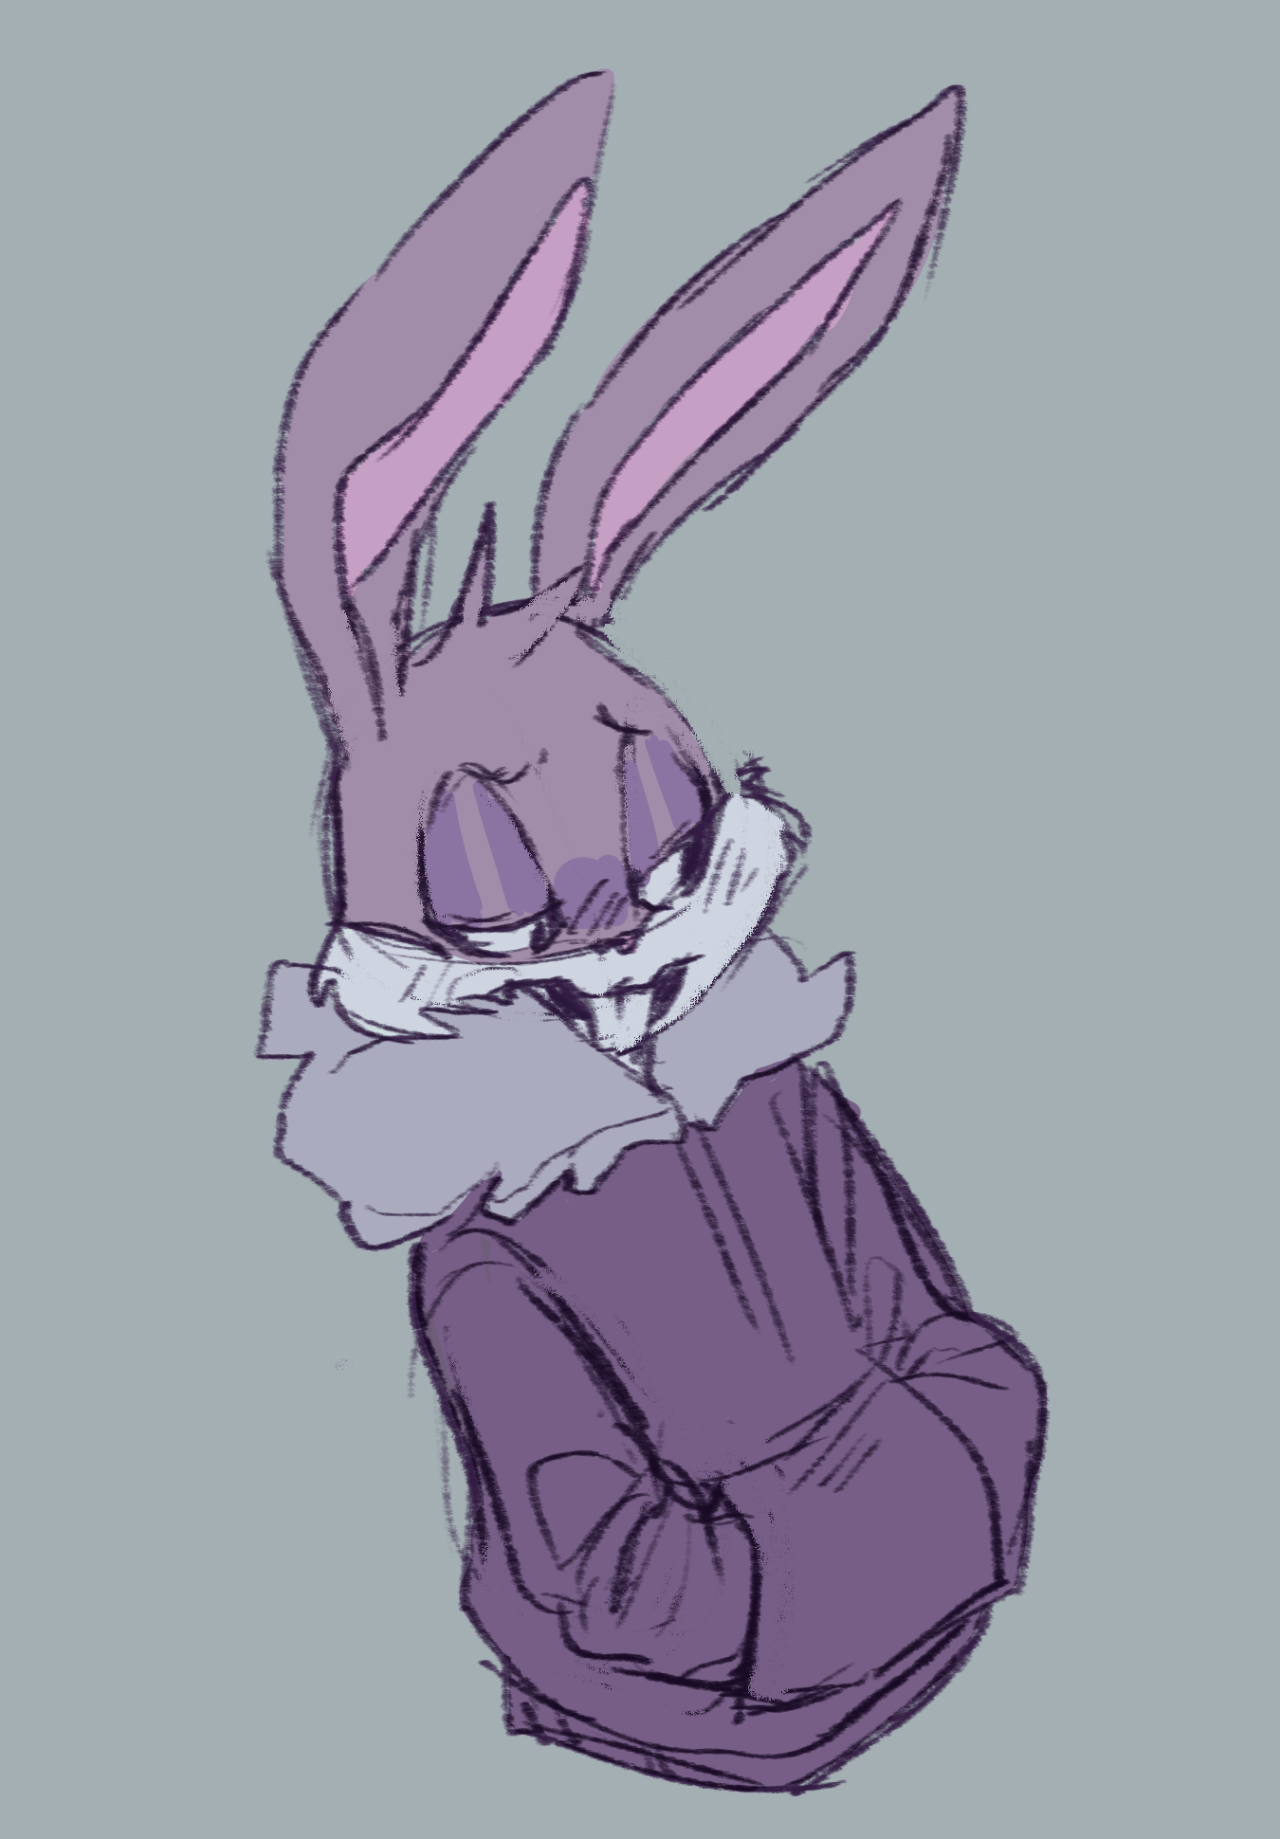 A drawing of an animated bunny with purple eyes - Bugs Bunny